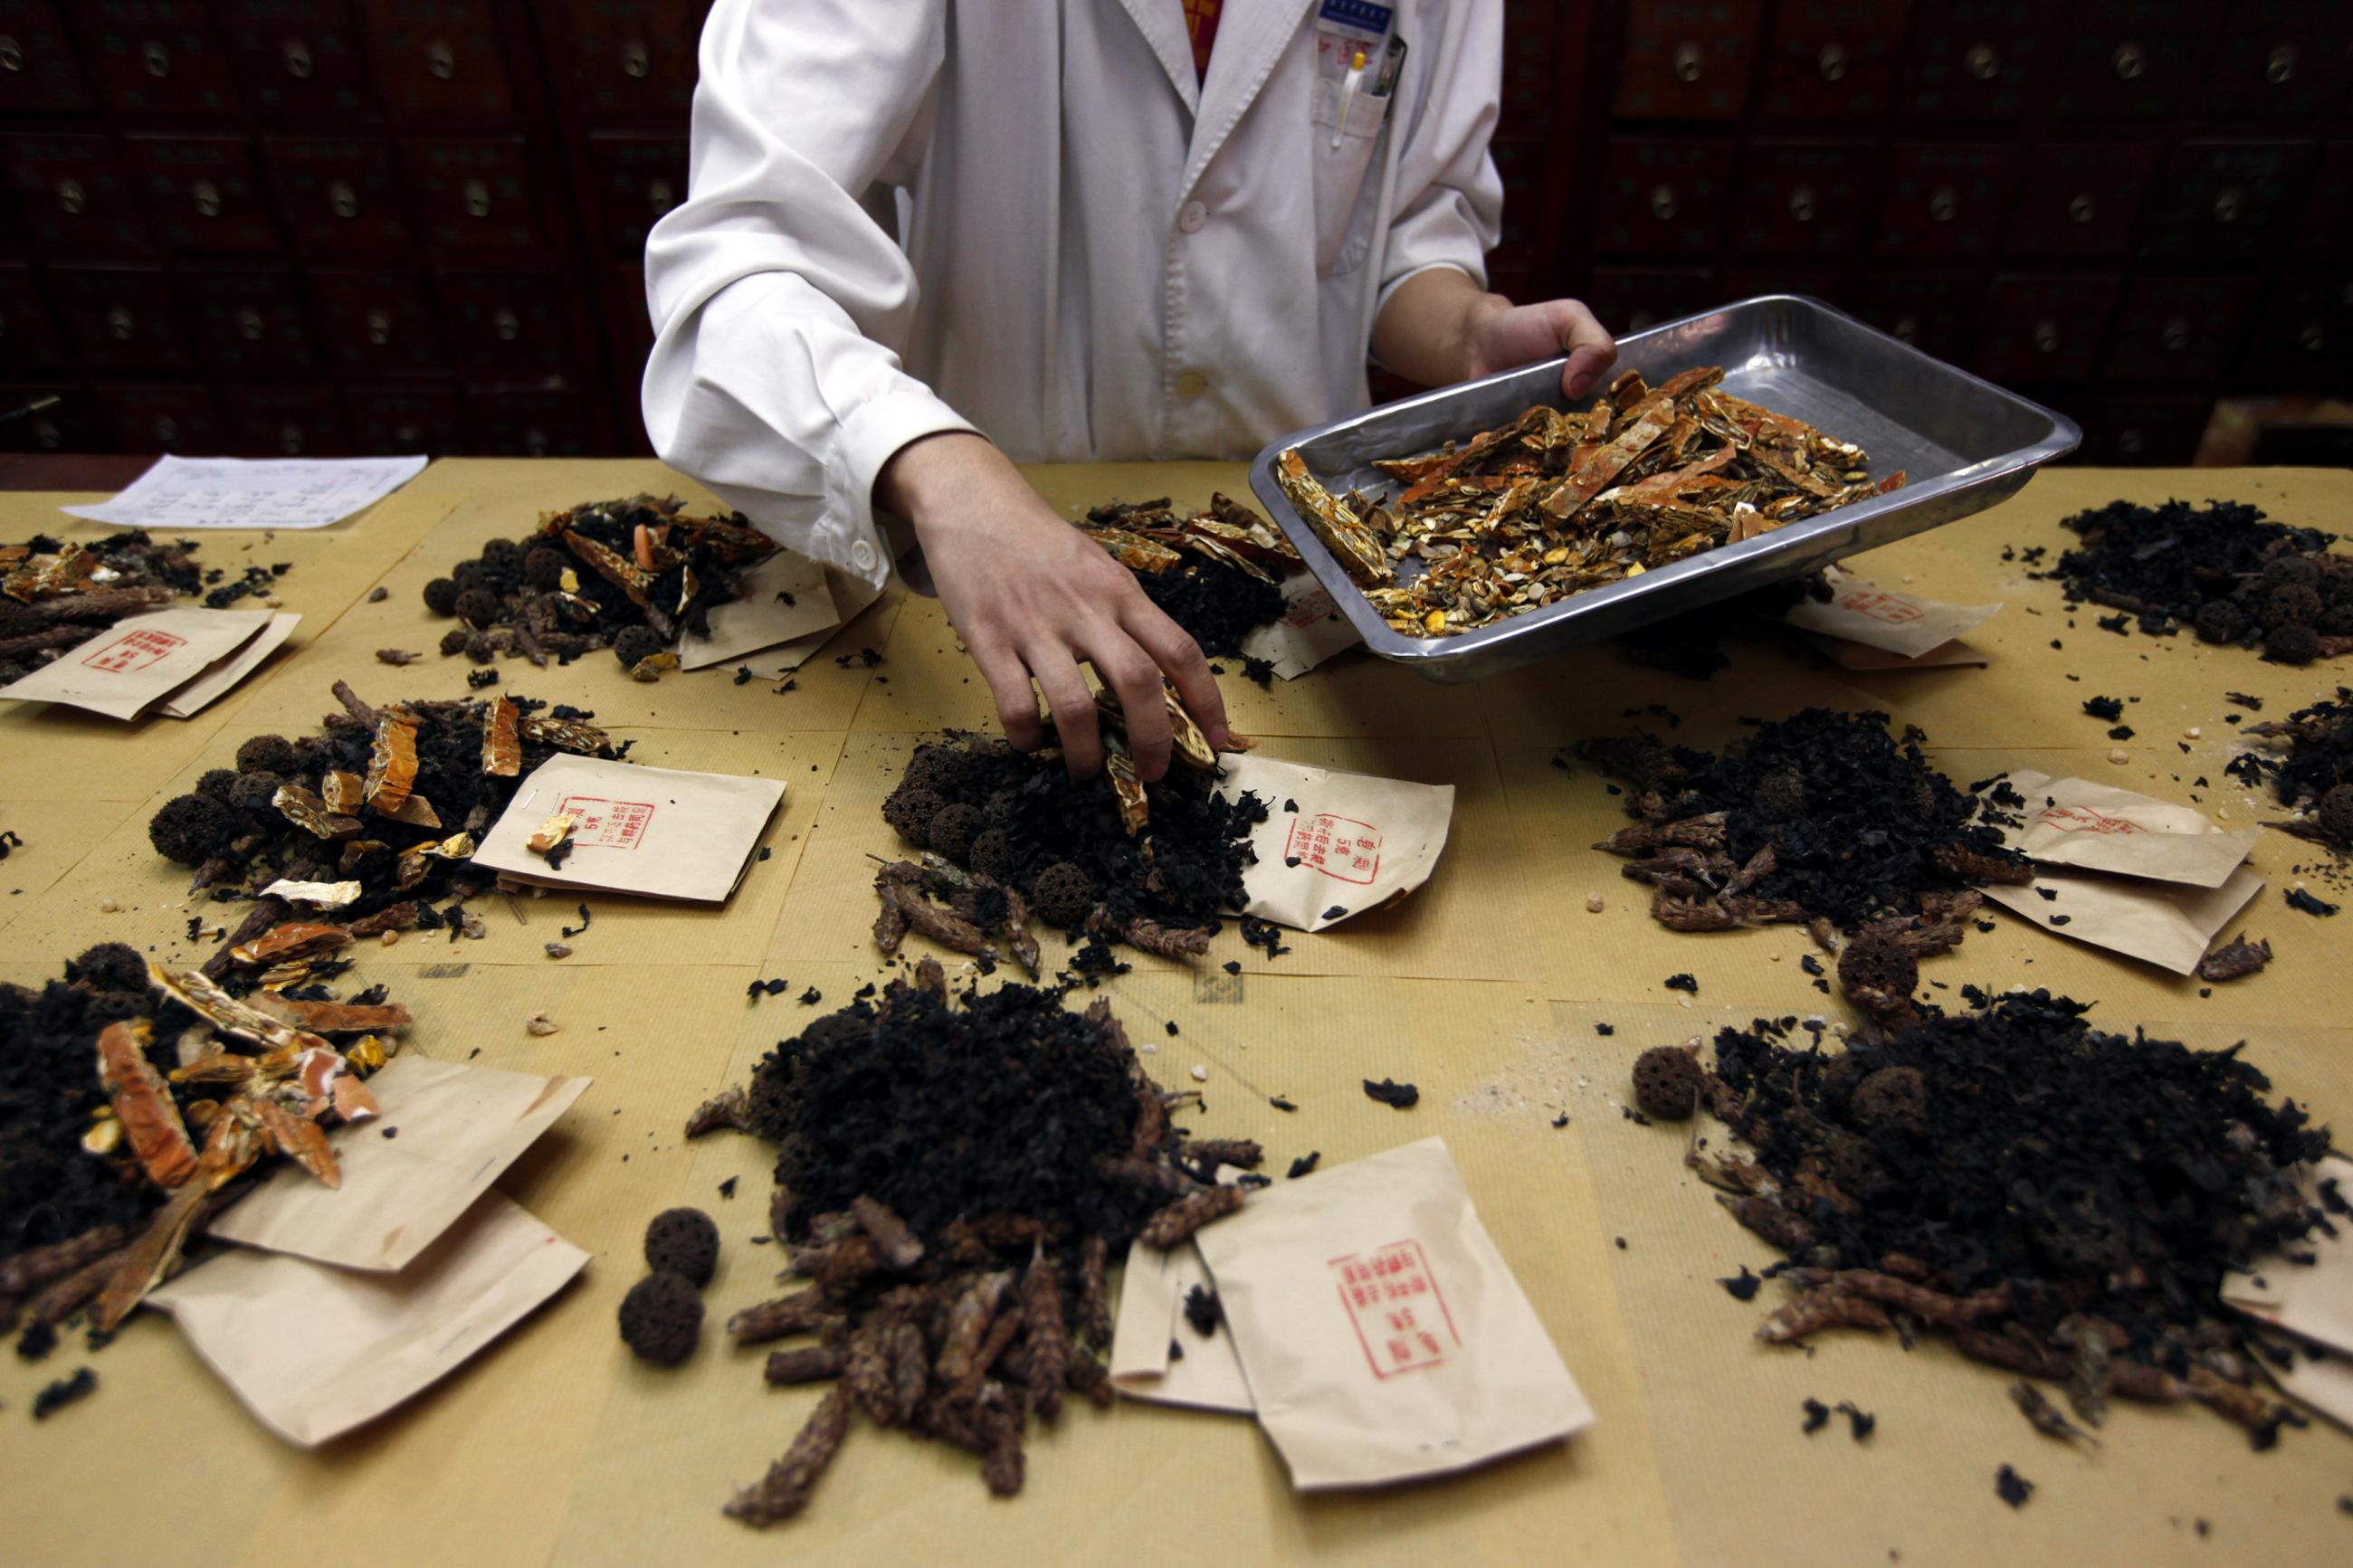 A worker prepares traditional Chinese herbal medicines at Beijing's Capital Medical University Traditional Chinese Medicine Hospital May 25, 2011. The hospital distributes around 20,000 prescription doses daily, more than five tonnes of ingredients, from their stock of 600 different types of plants, herbs, and animal organs. Almost all traditional Chinese herbal medicine has been banned from sale in European Union (EU) countries since May 1, following the implementation of the Traditional Herbal Medicinal P